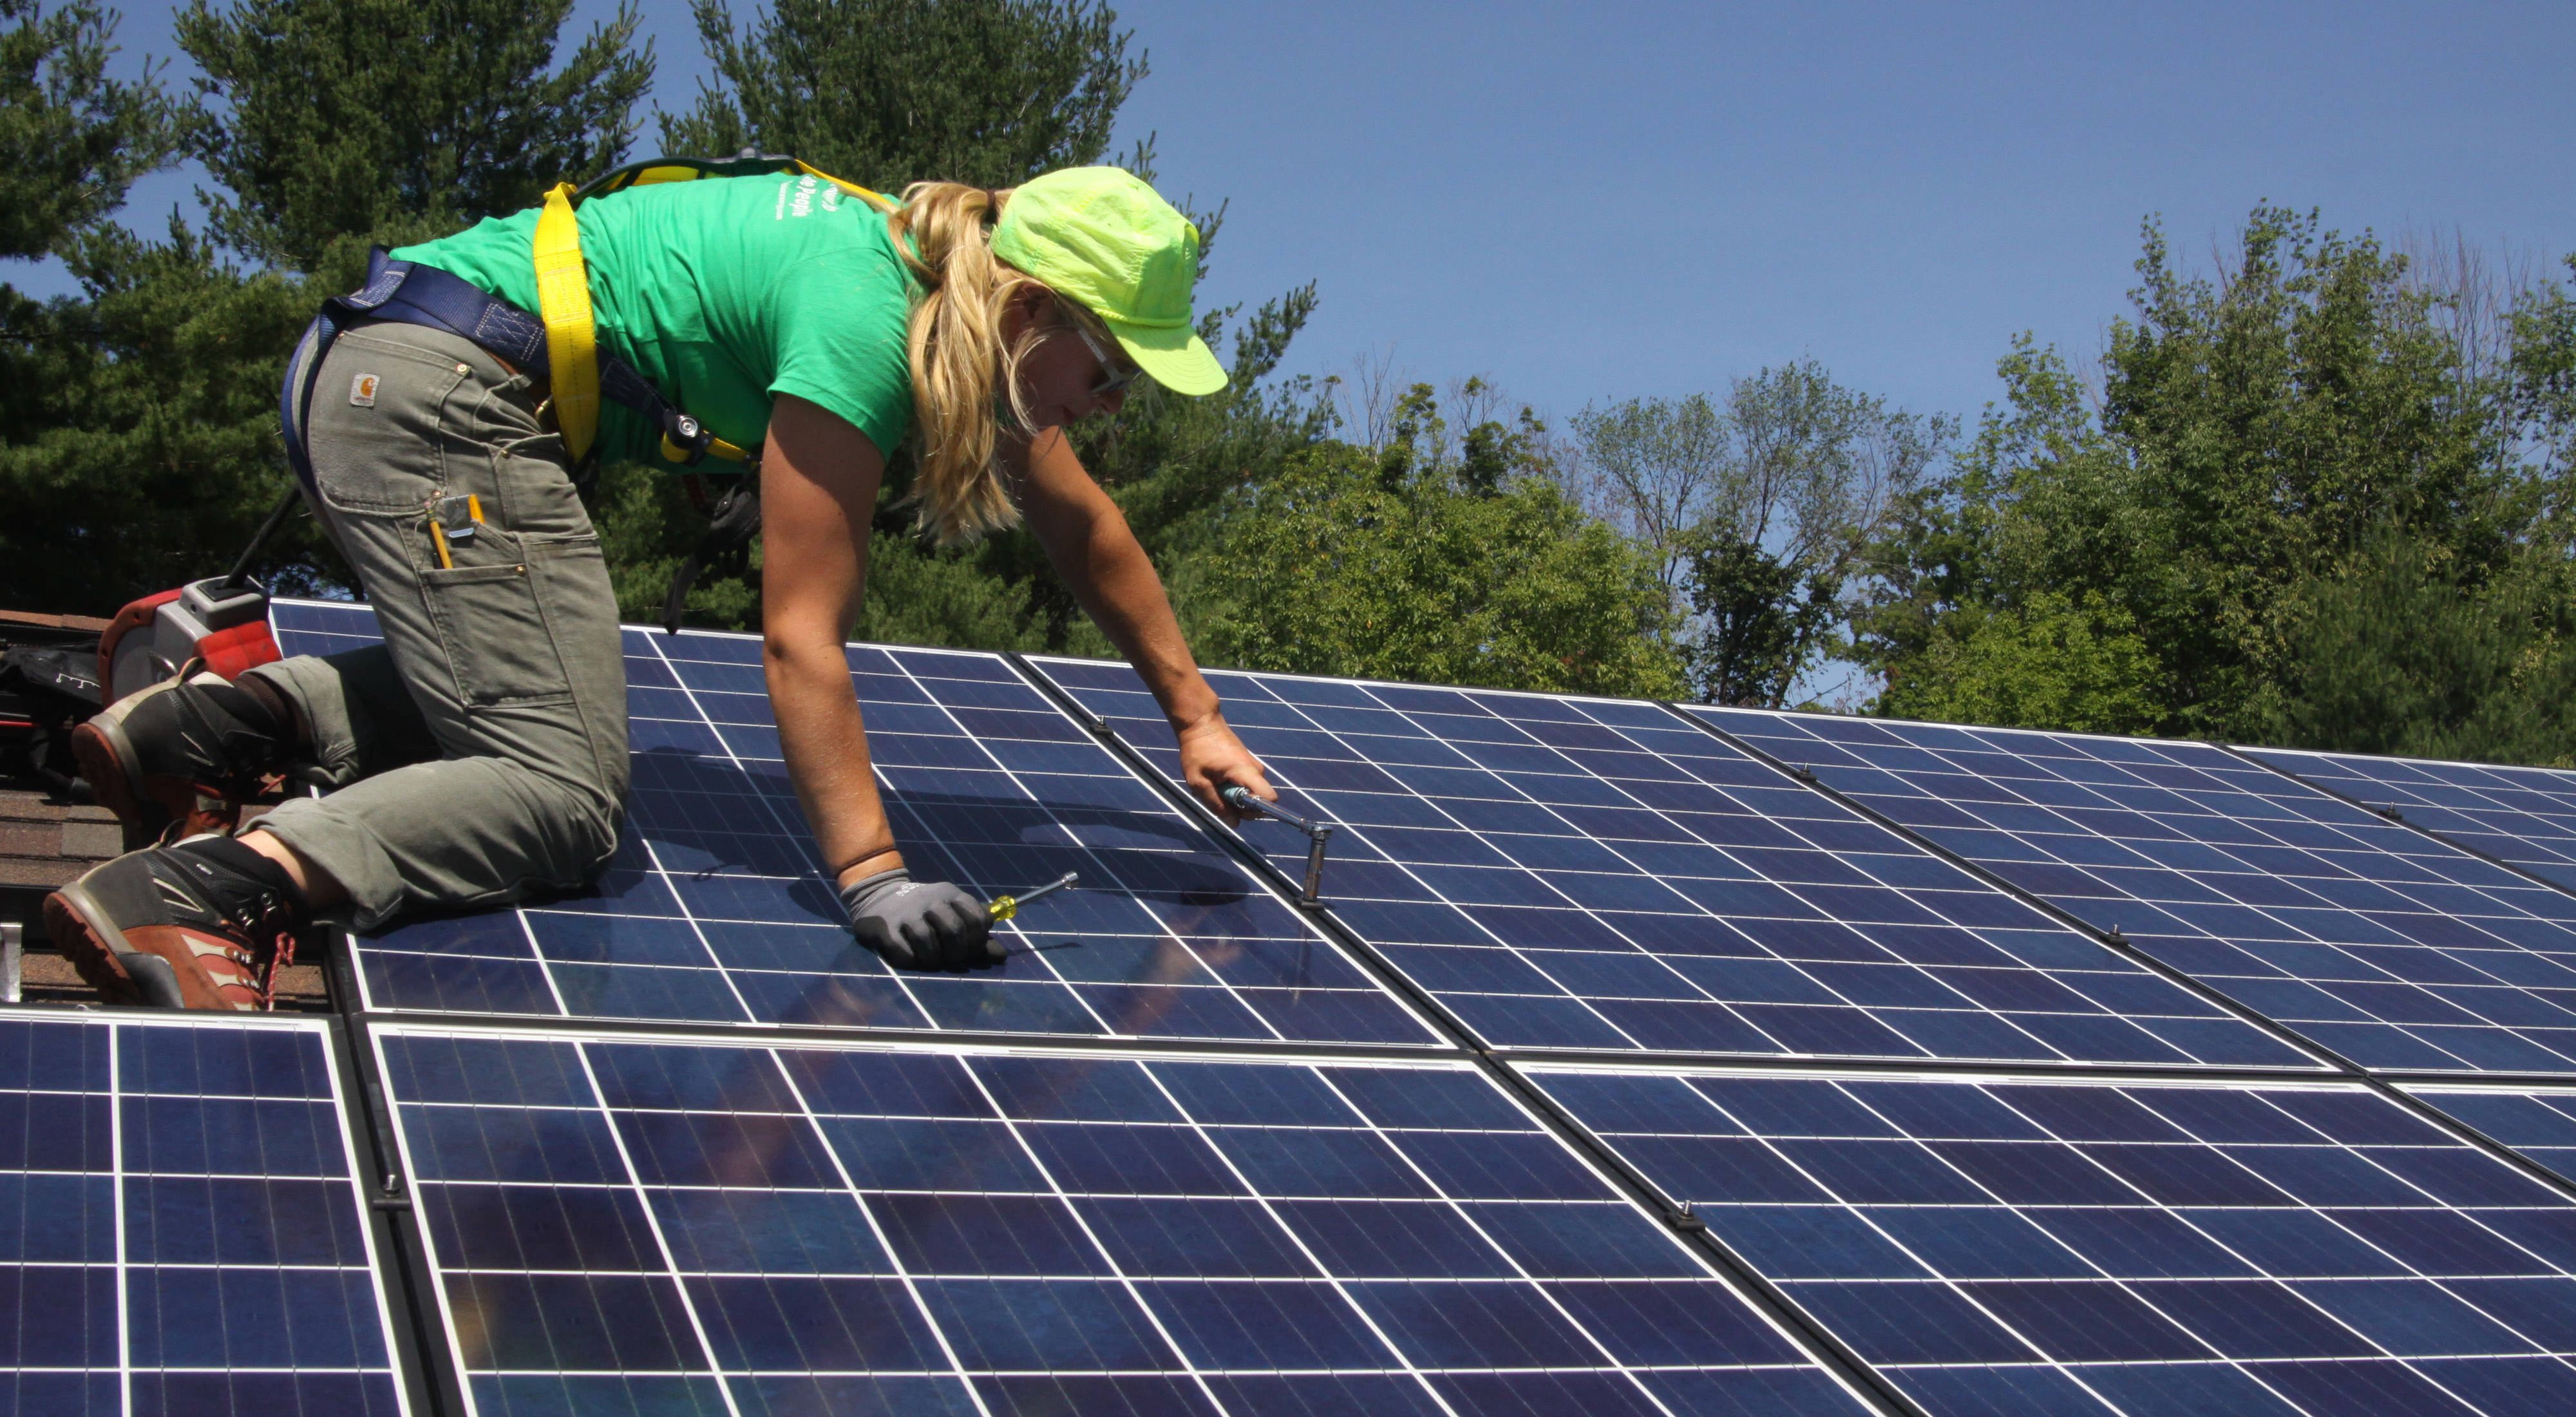 A woman in a green T-shirt installs solar panels on a residential building in New Hampshire.